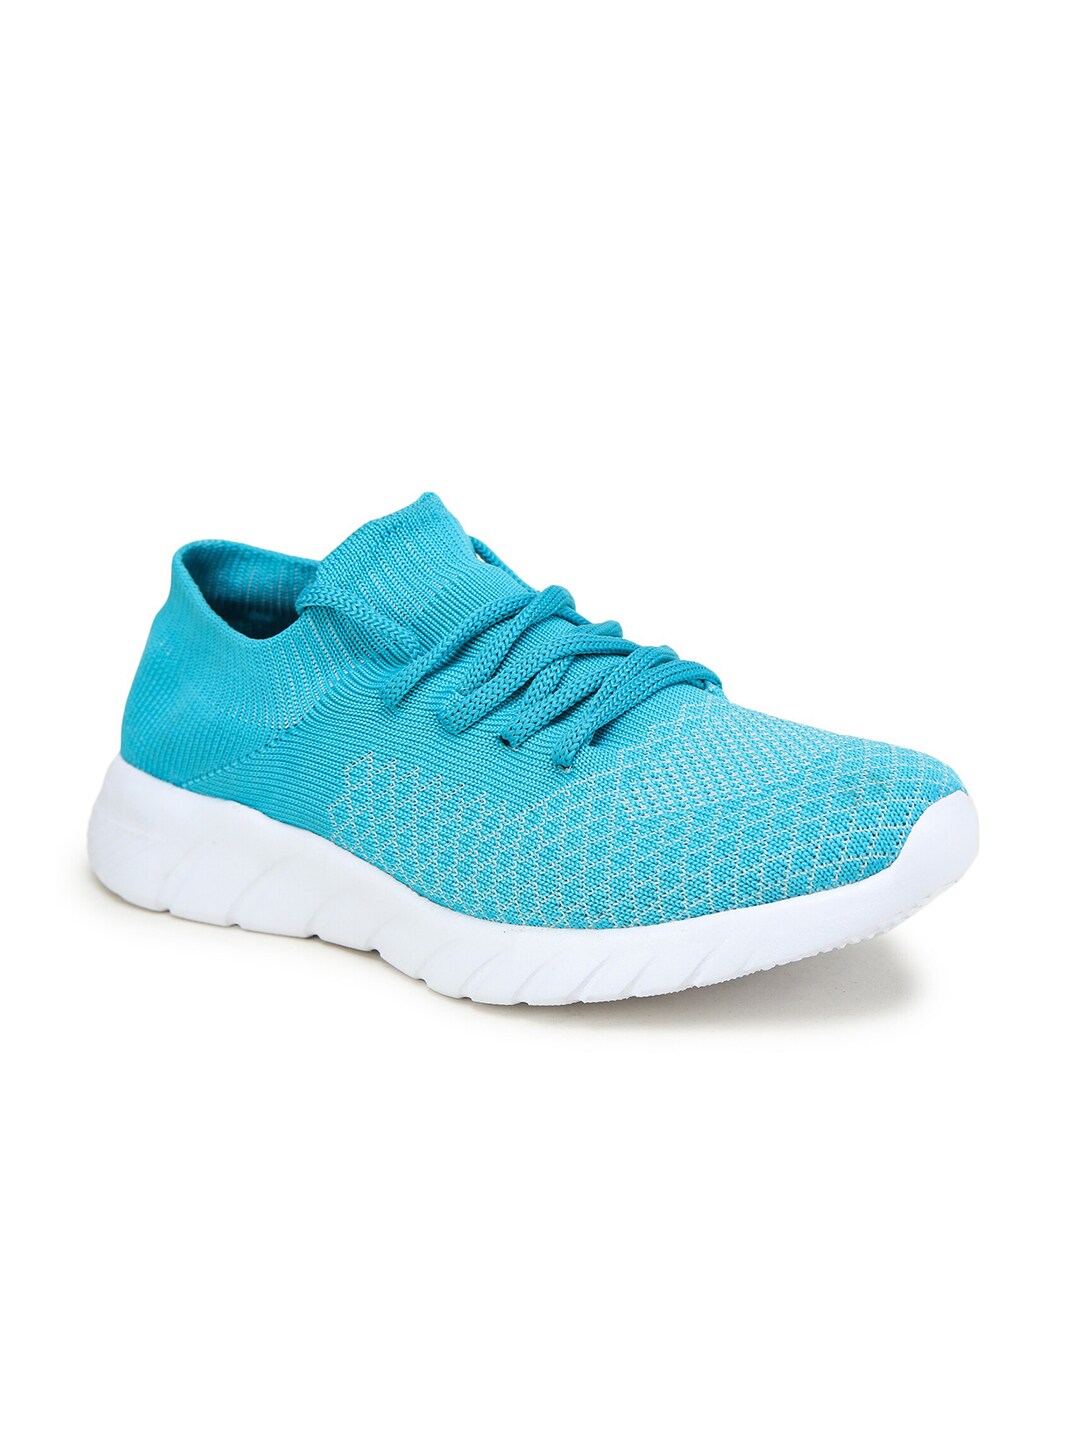 TRASE Women Sea Green Running Shoes Price in India